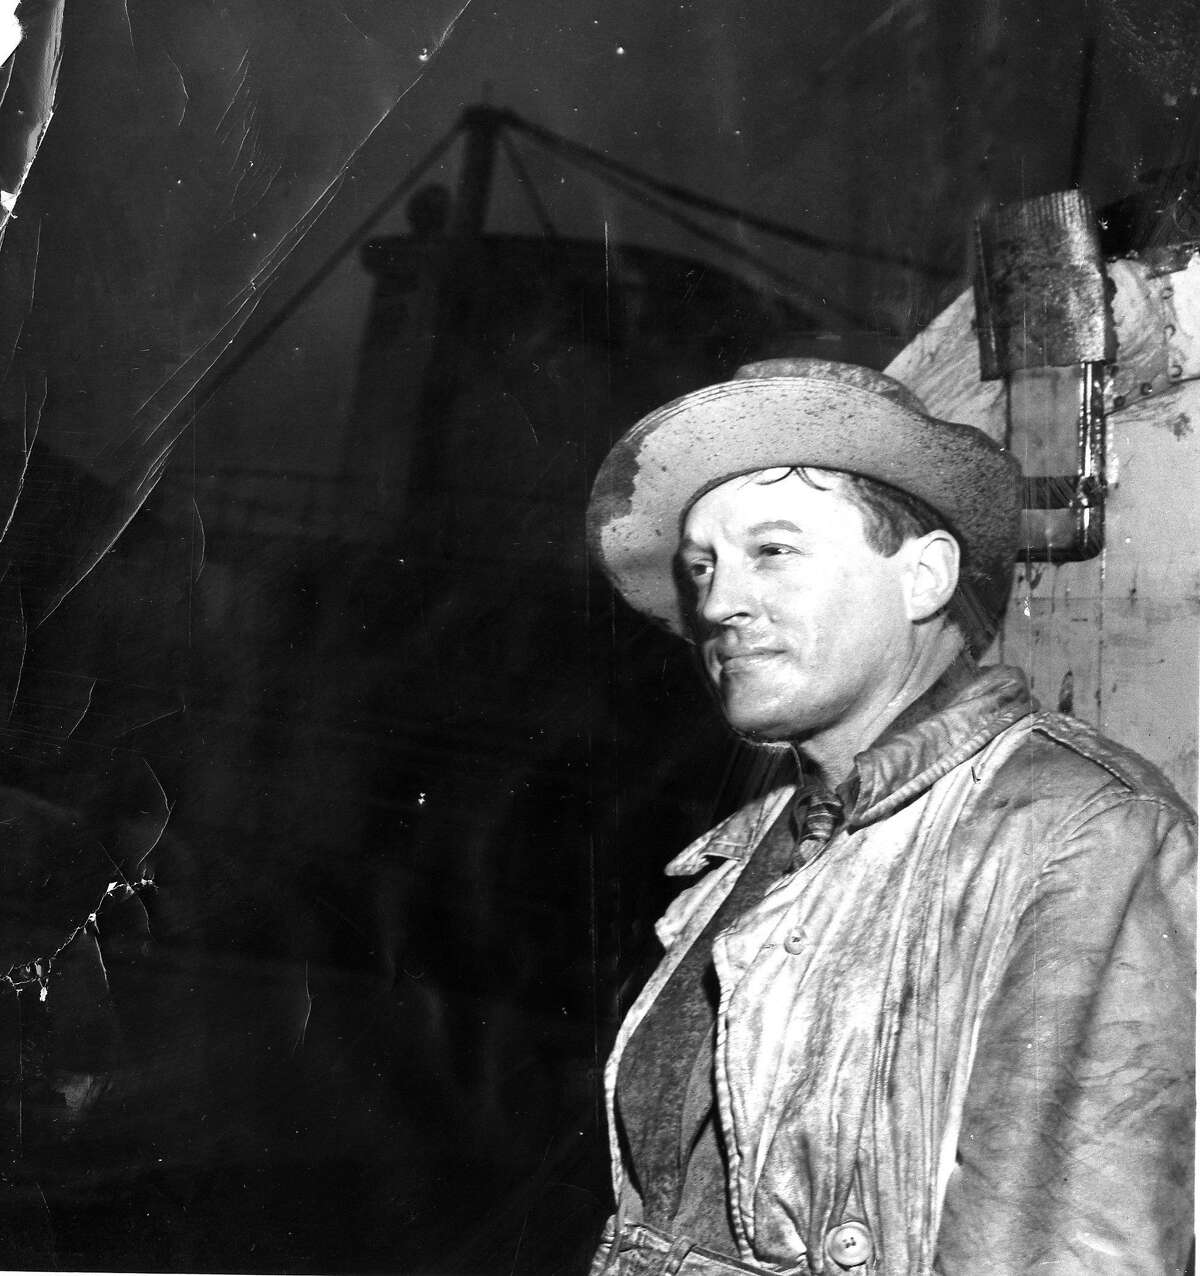 Barney Gould contemplates the sunken Port of Stockton riverboat, he had hoped to convert into a showboat and restaurant, March 12, 1952 Phot ran 3/26/1953, p. 18